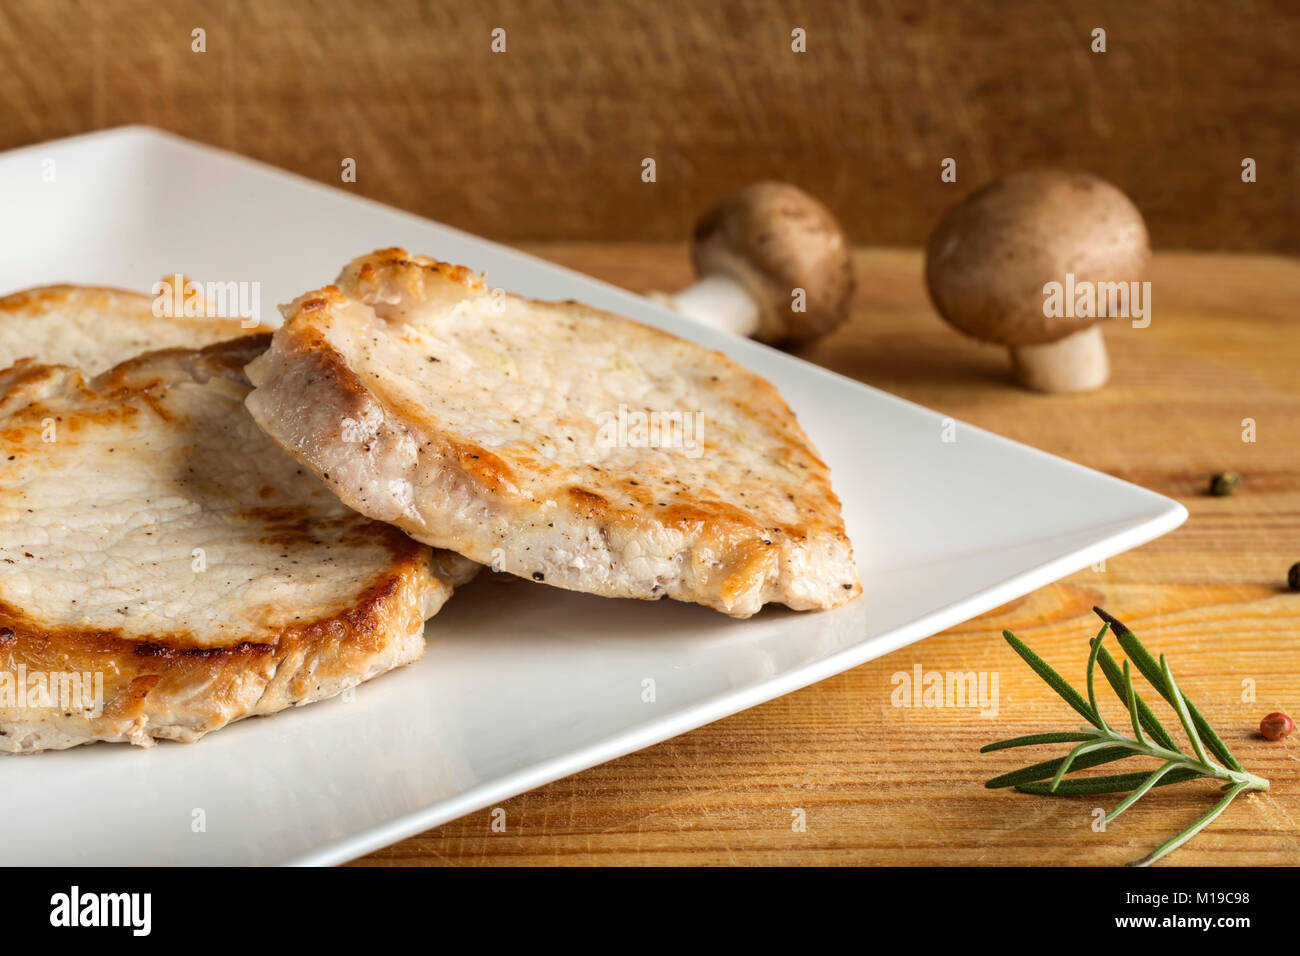 Three pieces of pork sirloin on white plate with wooden background Stock Photo